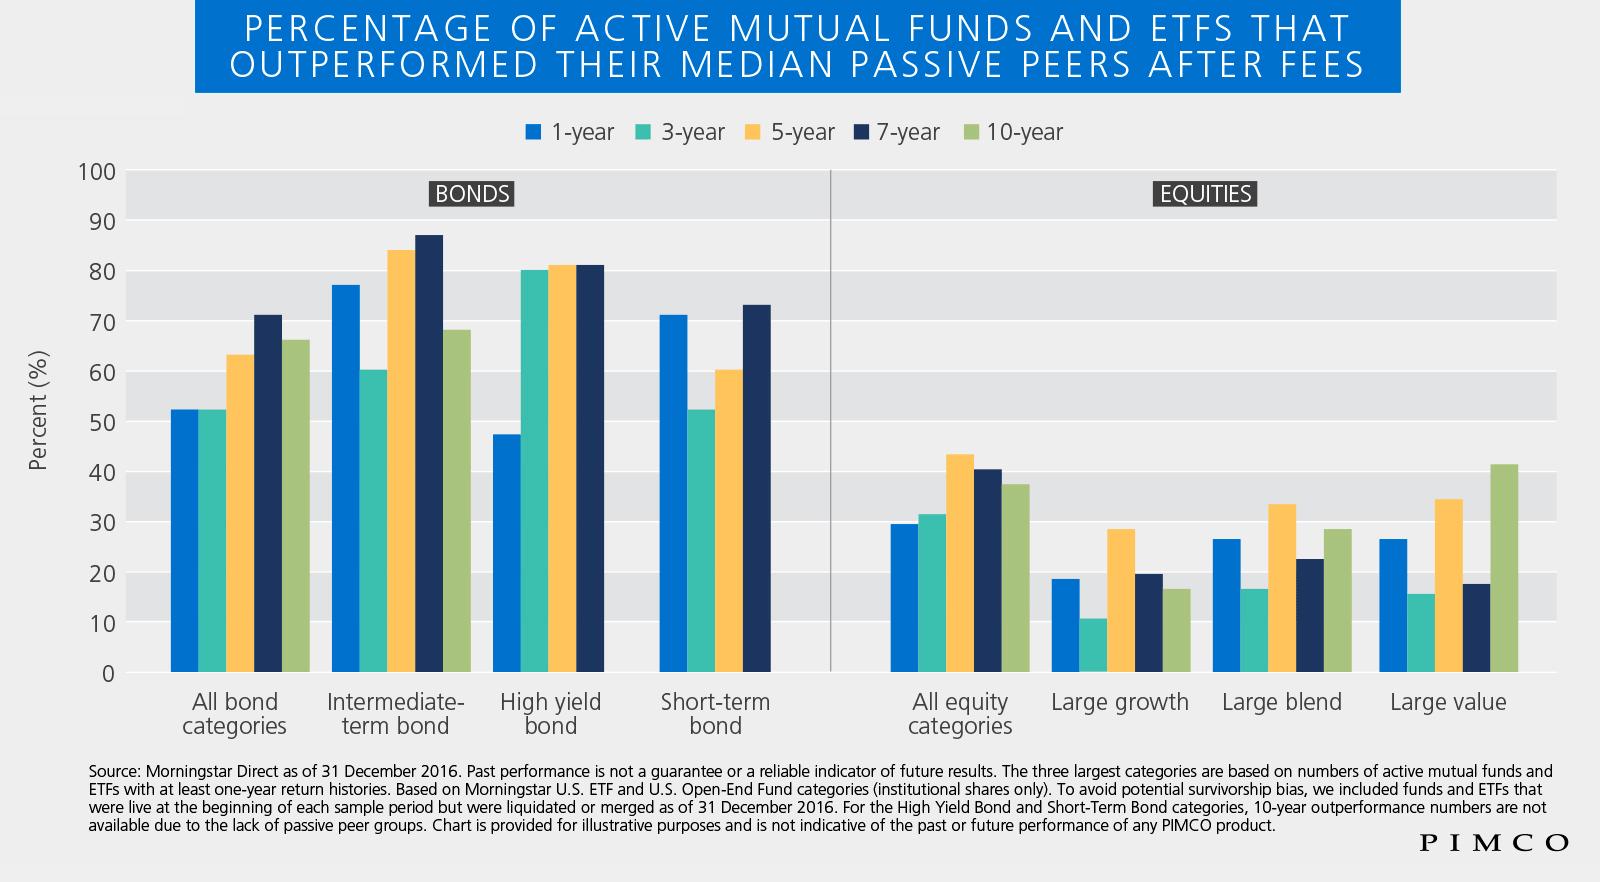 Percentage of Active Mutual Funds and ETFs that outperformed their median passive peers after fees